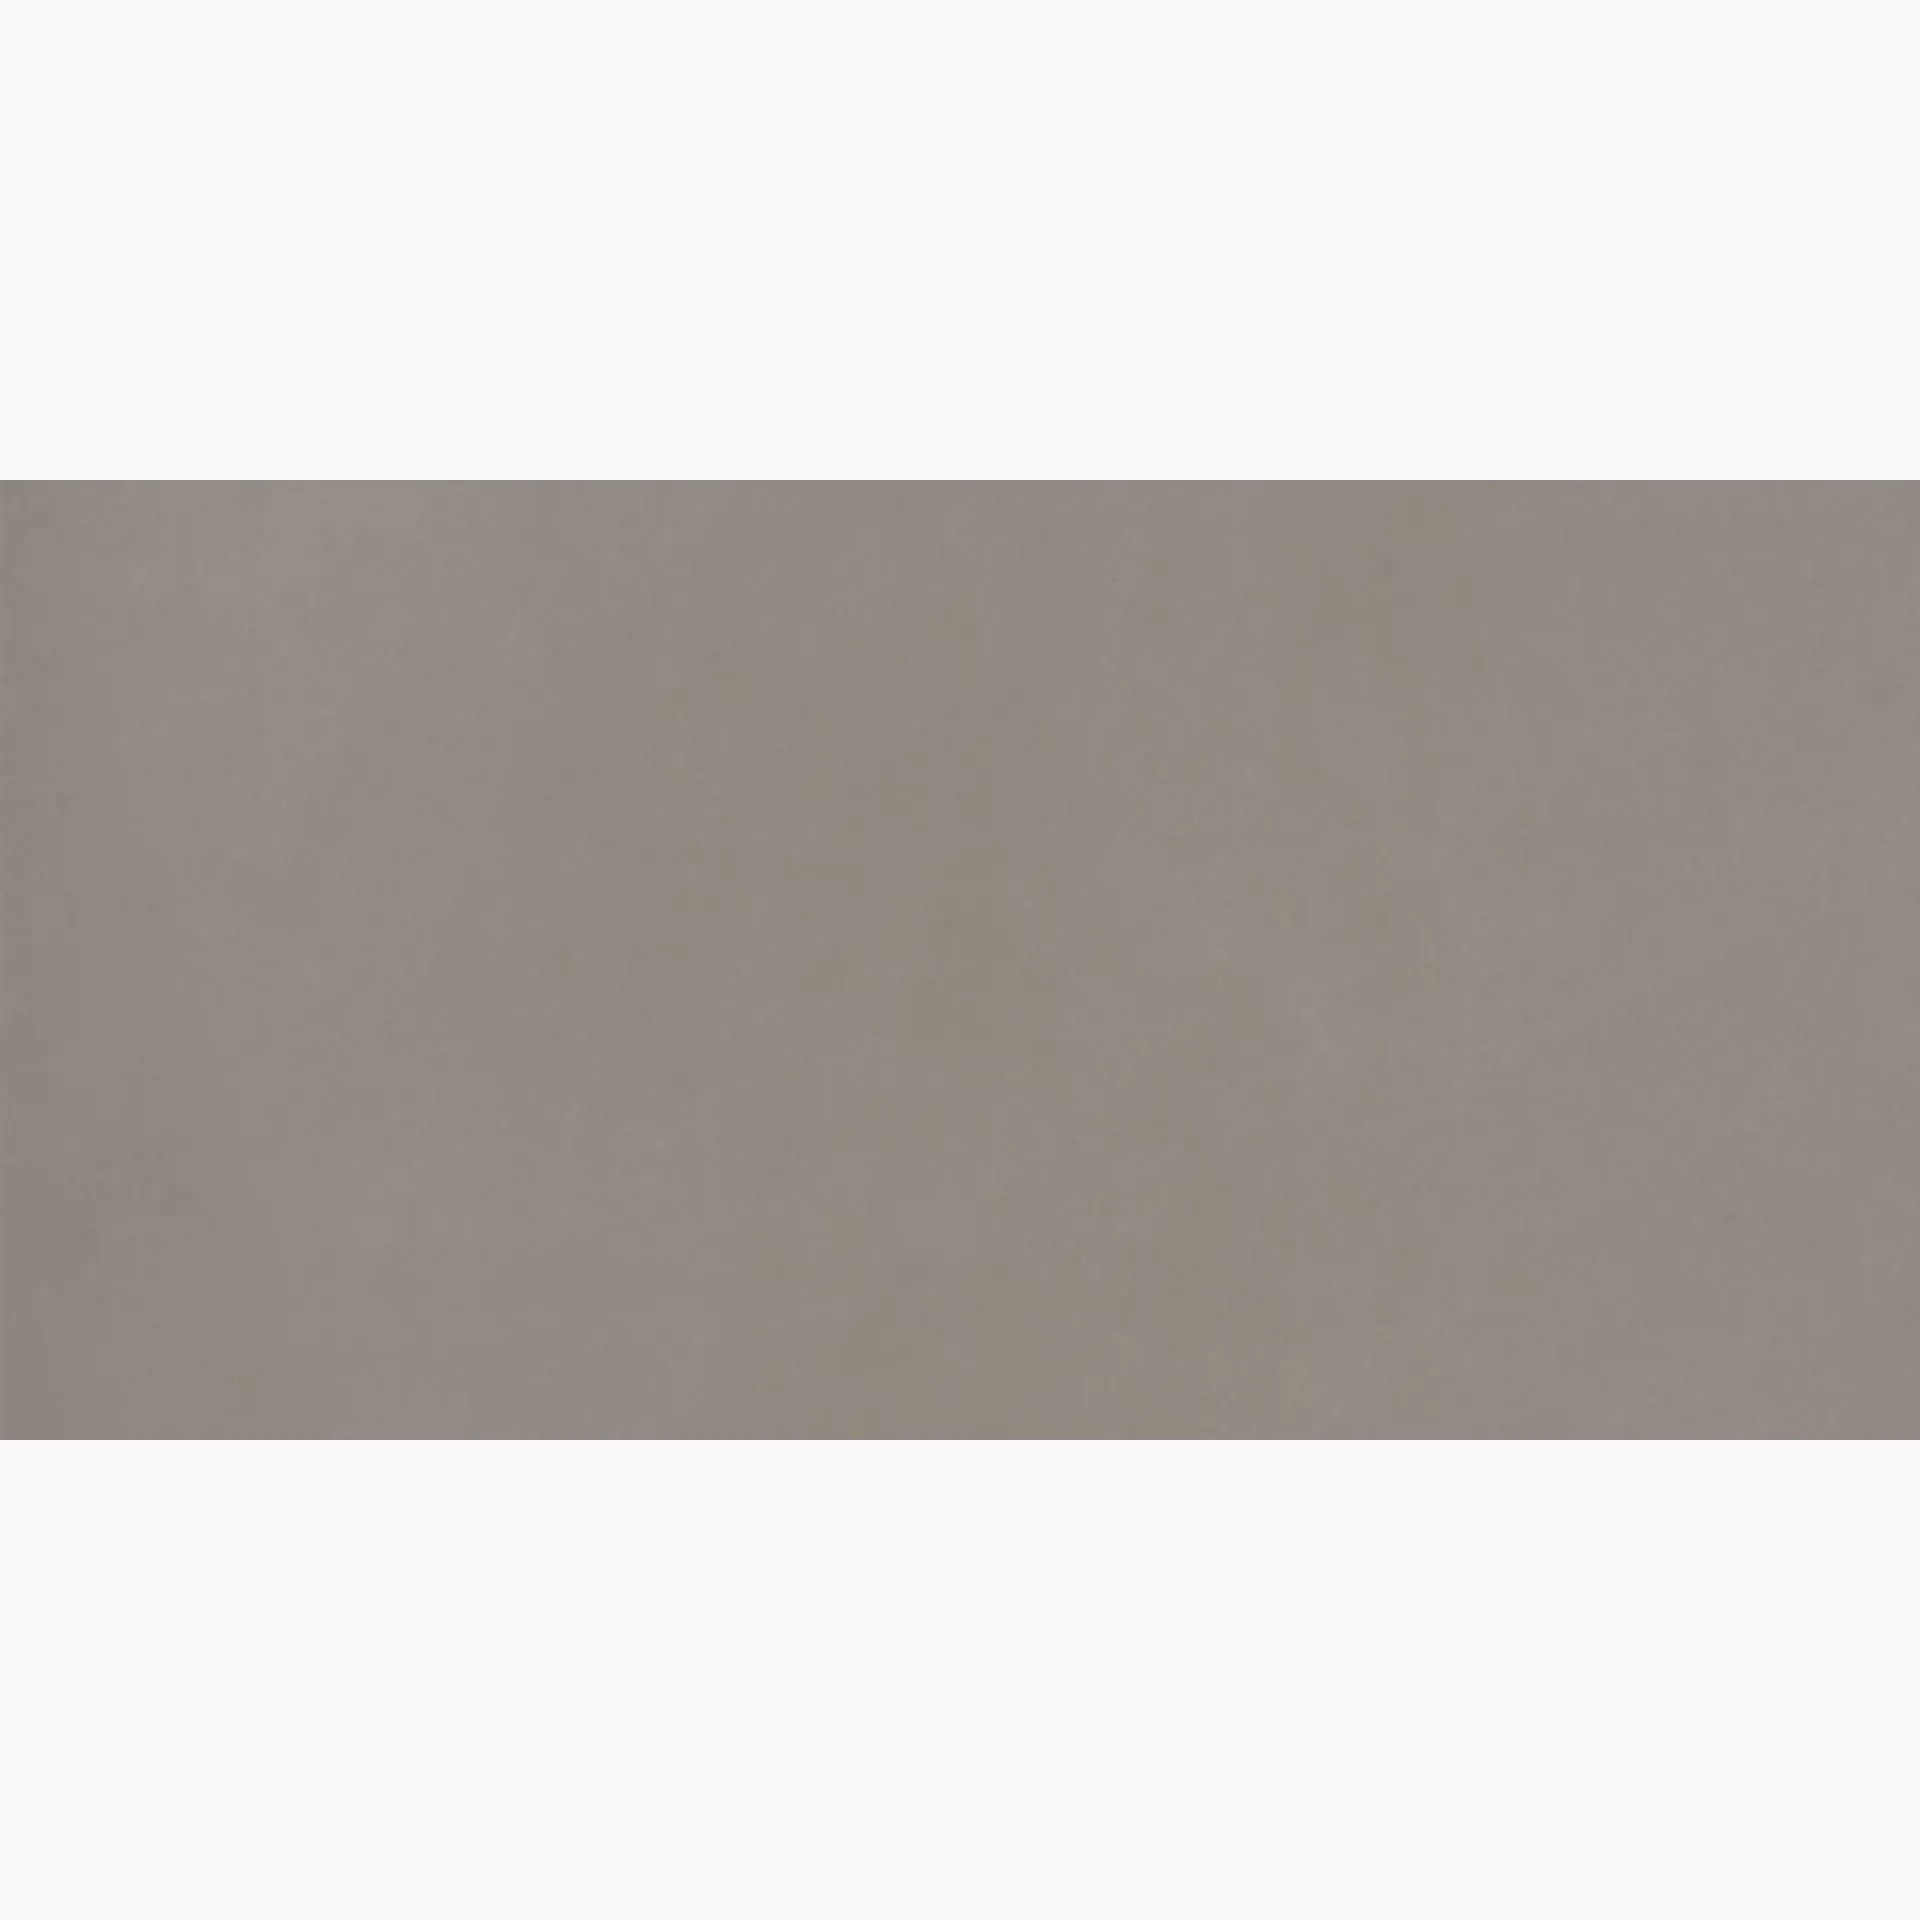 Keope Elements Design Taupe Lappato Taupe 37344130 gelaeppt 60x120cm rektifiziert 9mm